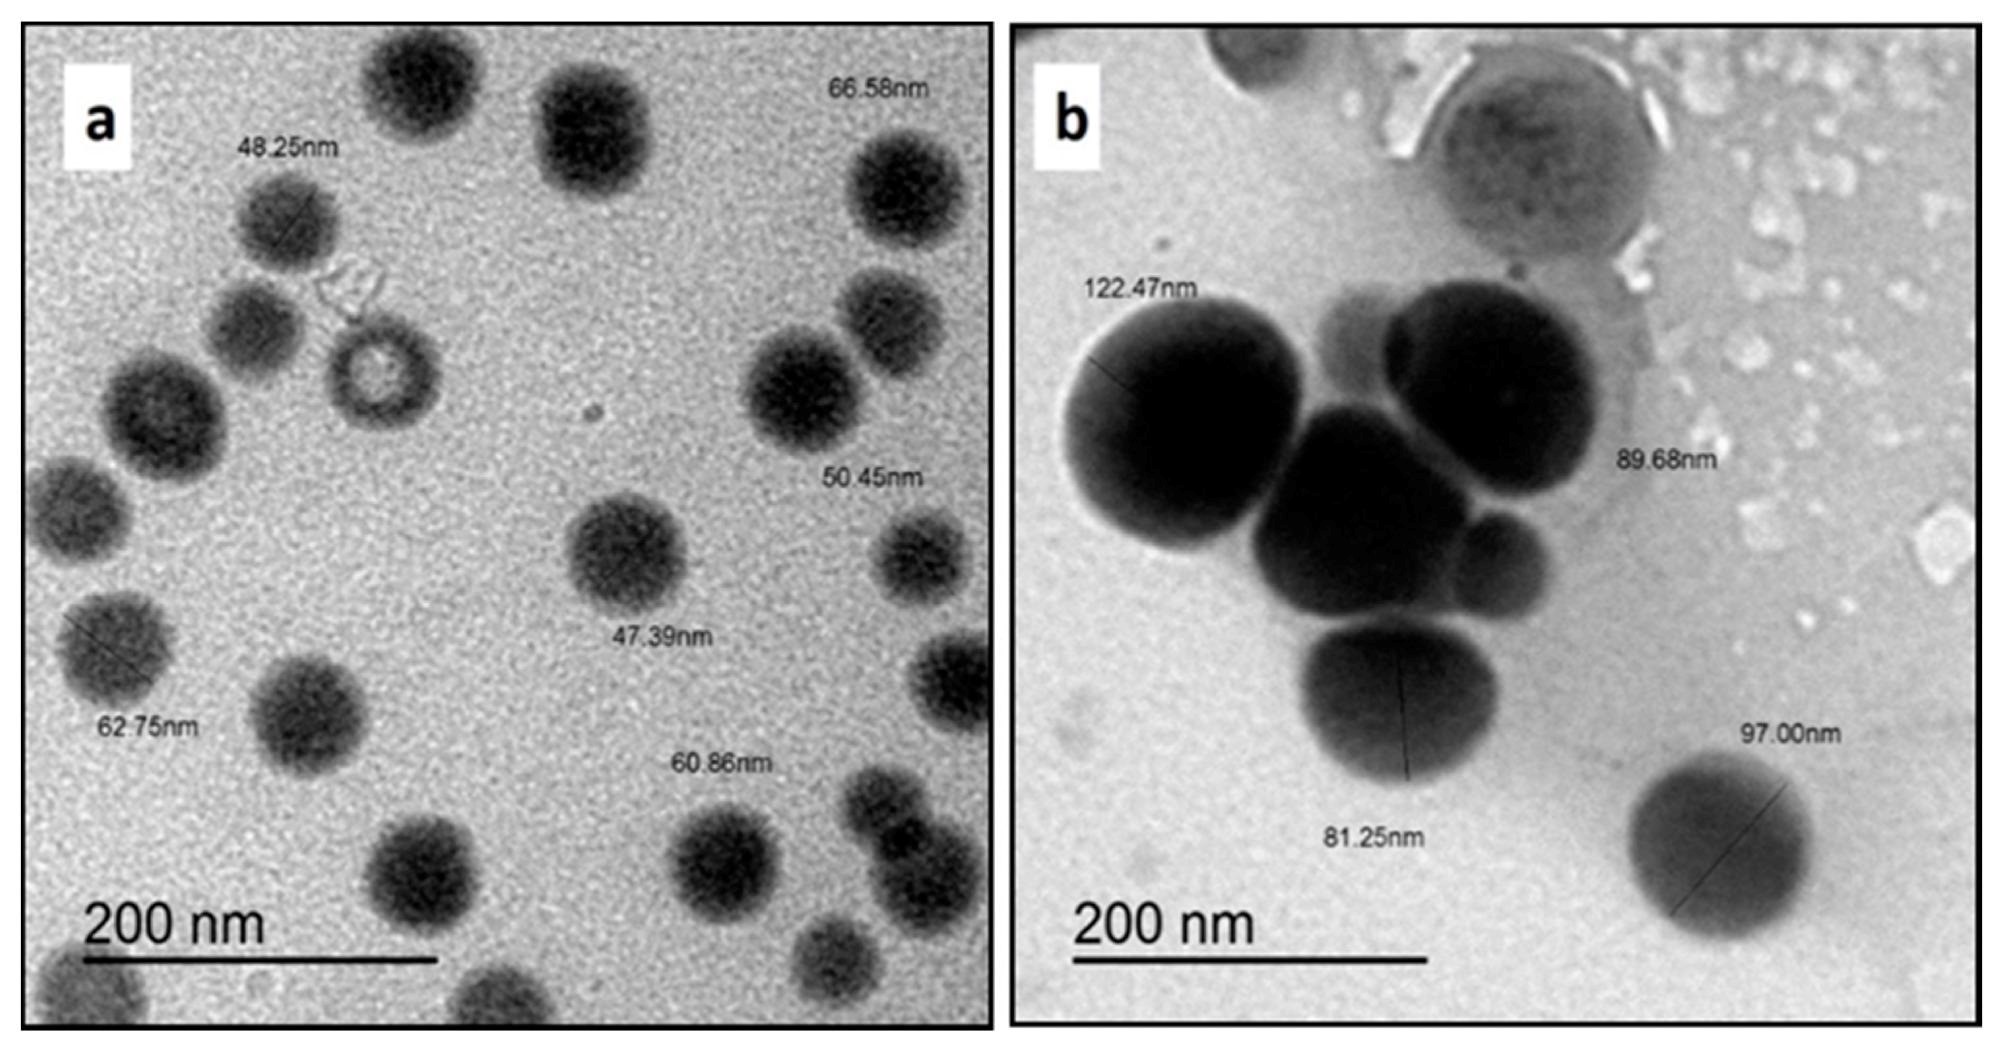 TEM micrographs of SeNPs prepared at different concentrations of (a) 25 mM and (b) 50 mM.